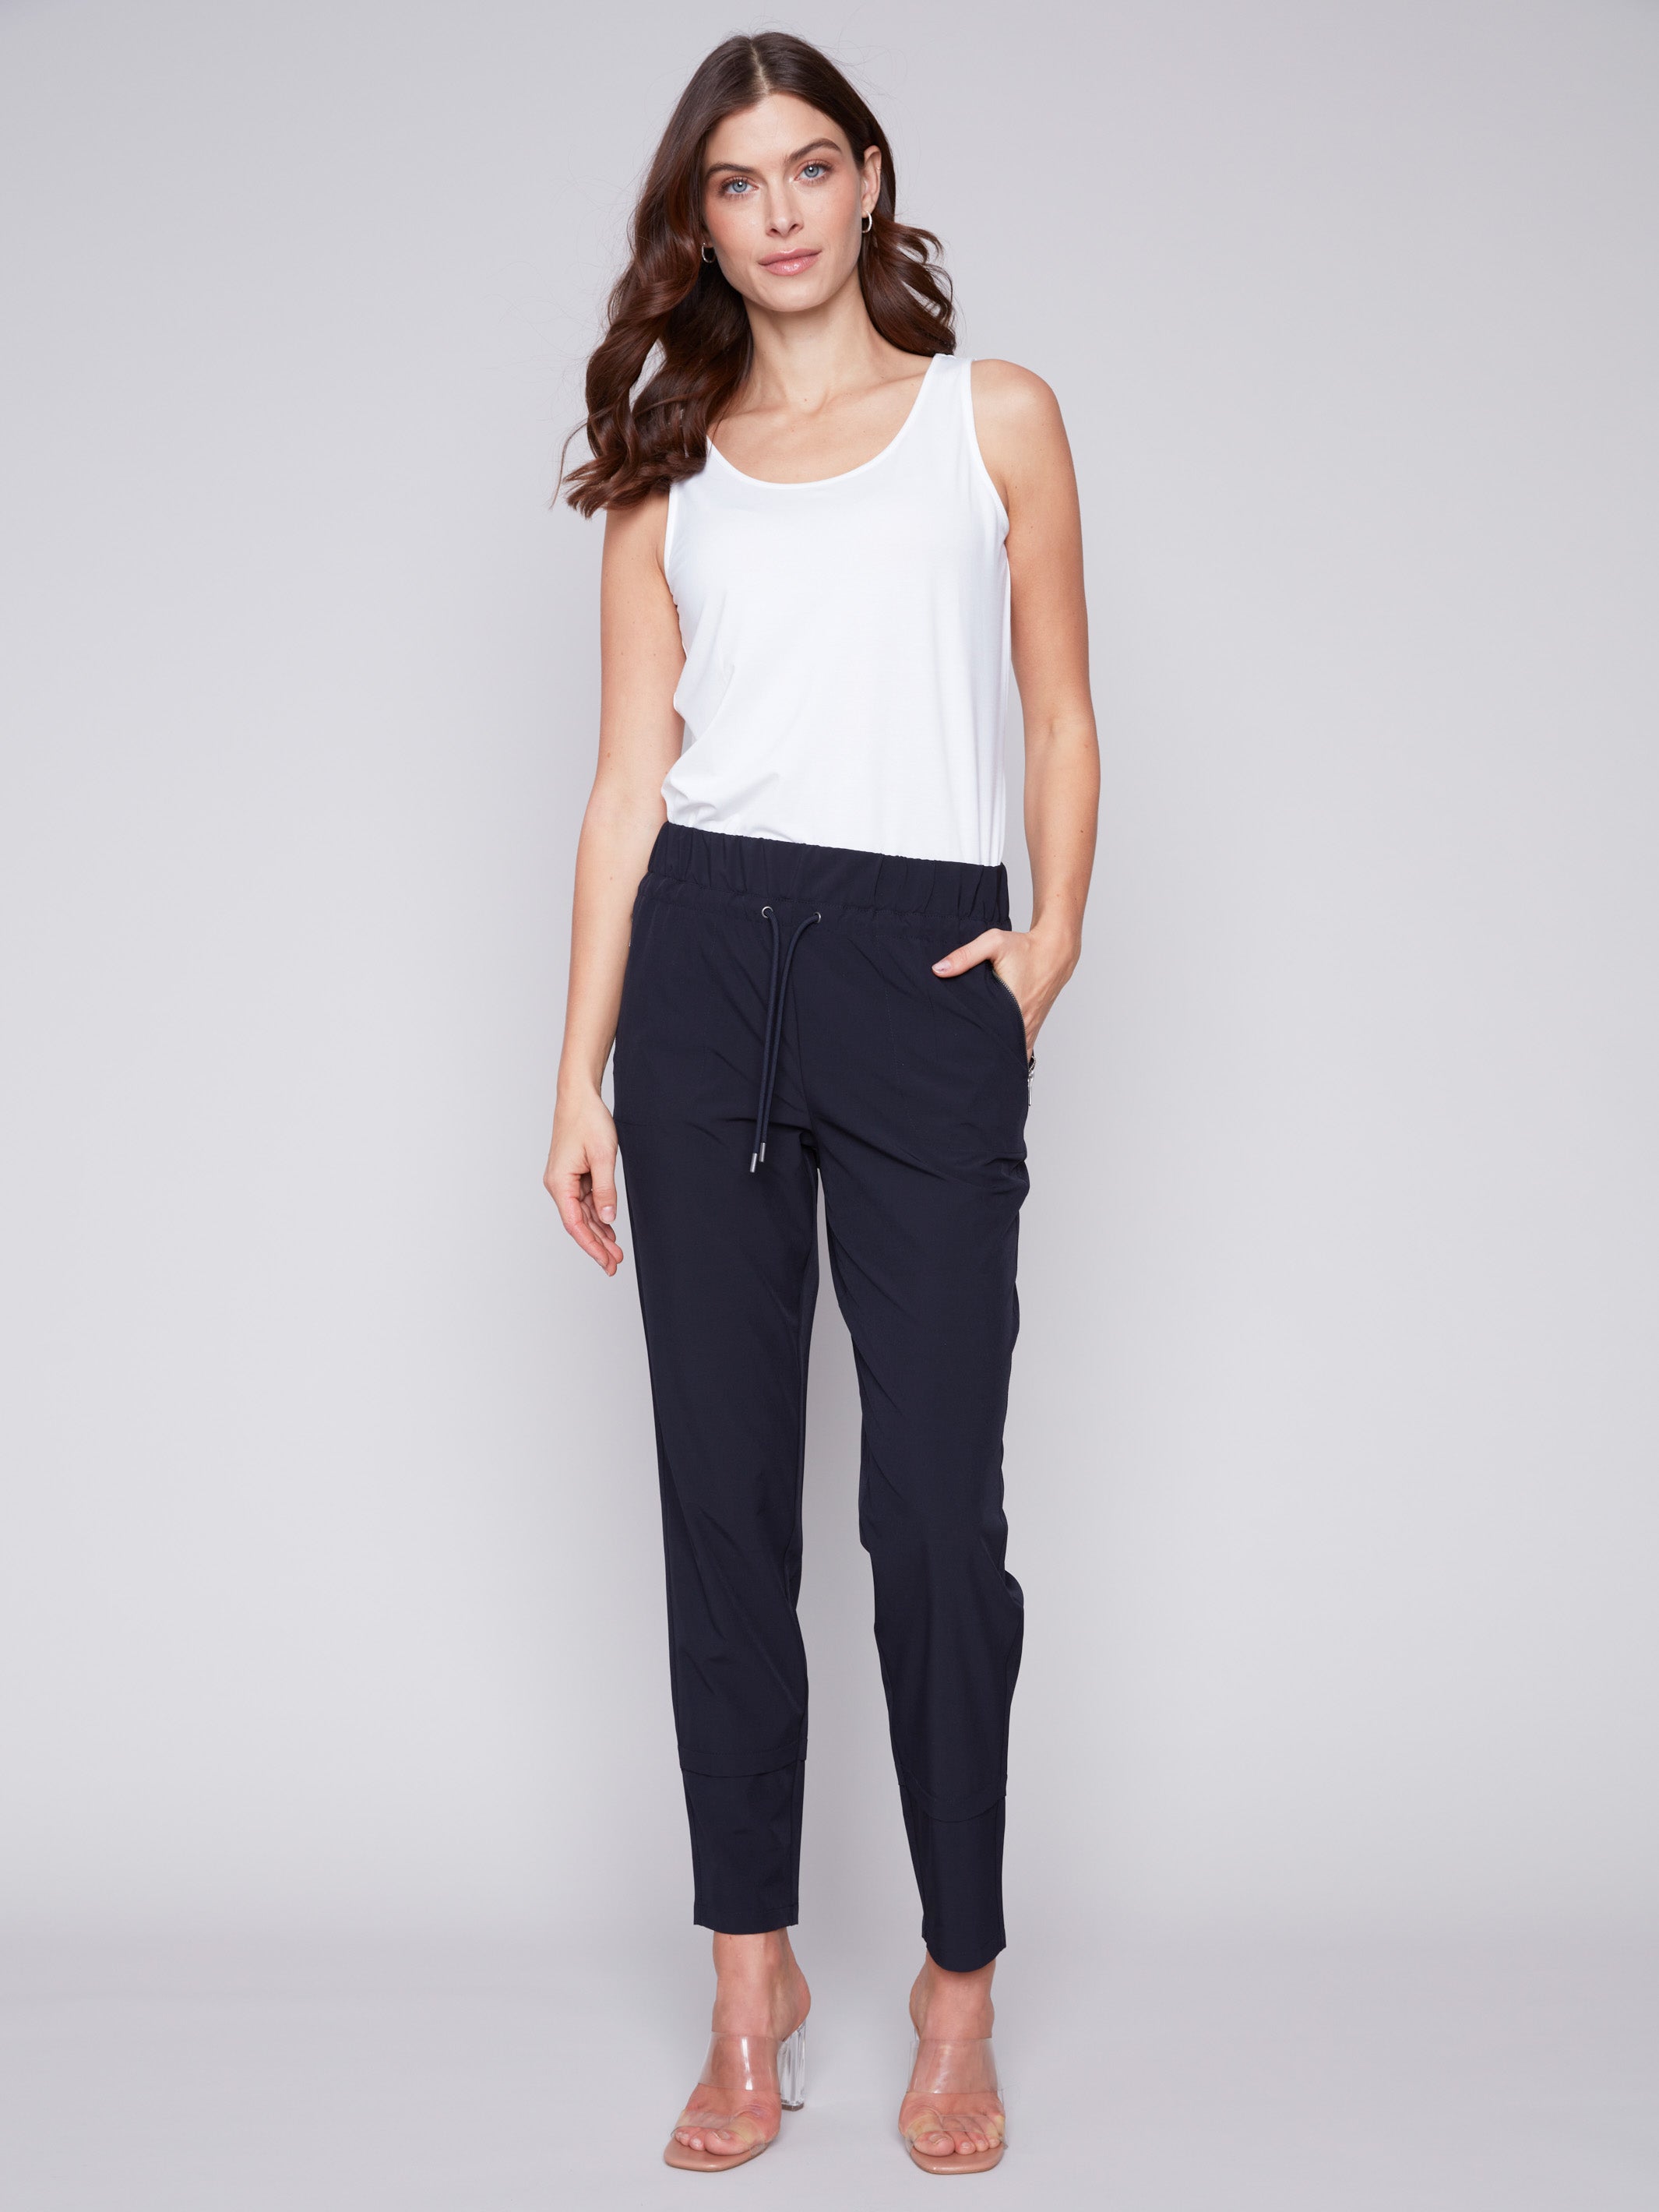 Black Joggers for Women, Tapered Techno Pant